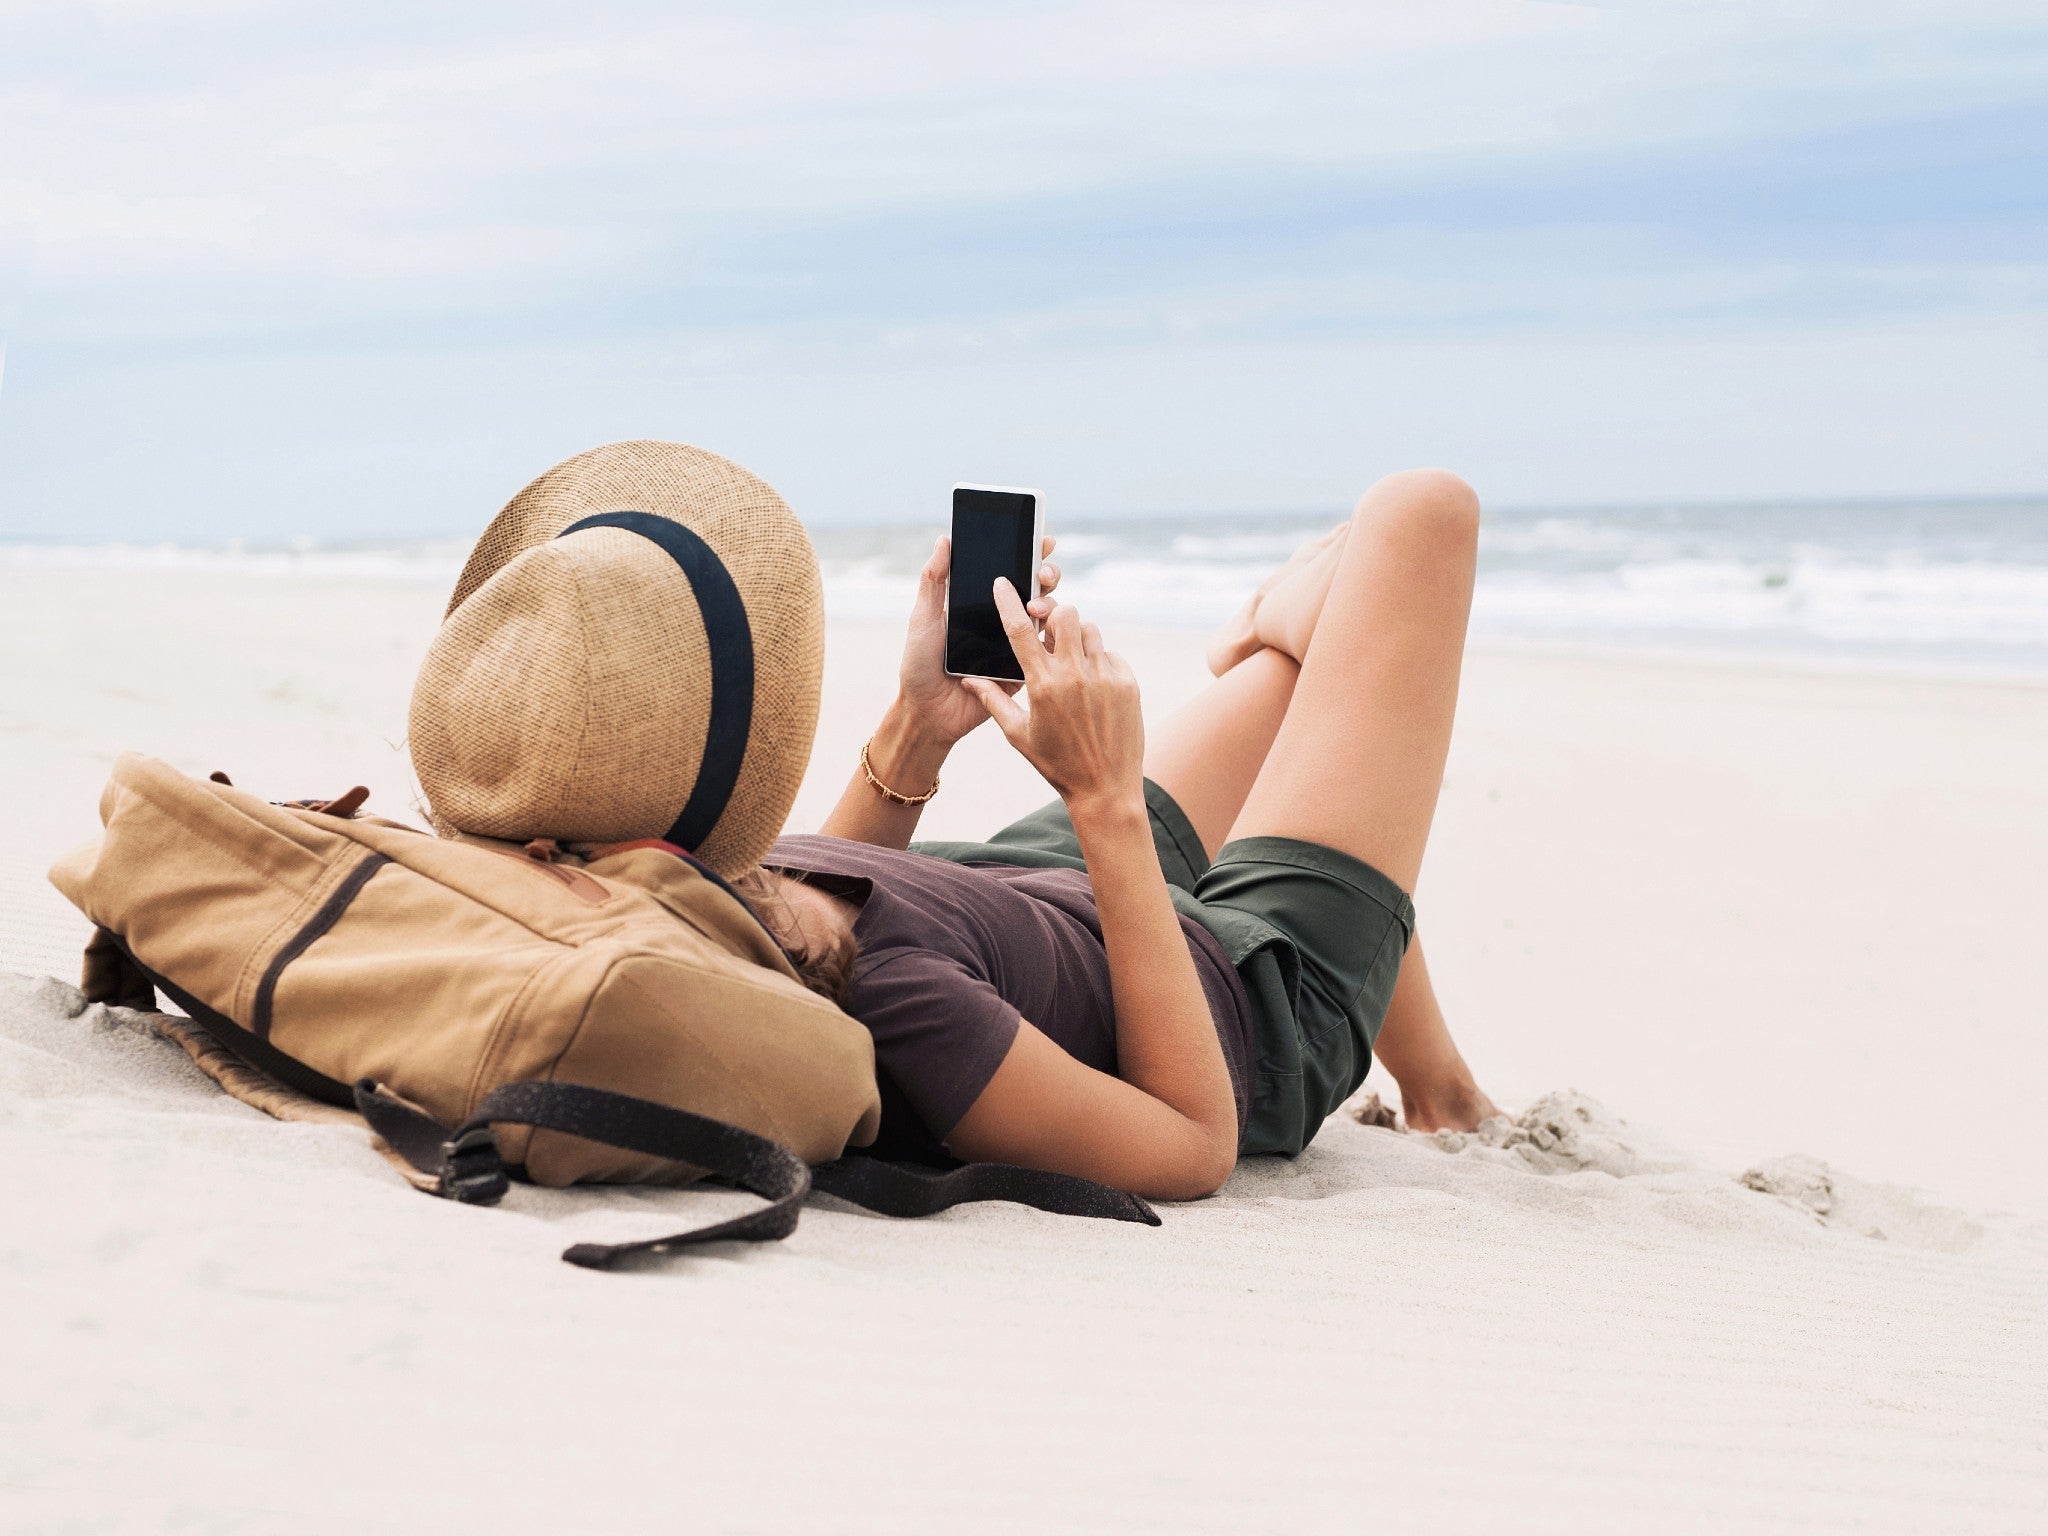 Data roaming on holiday in the EU has become the norm for many